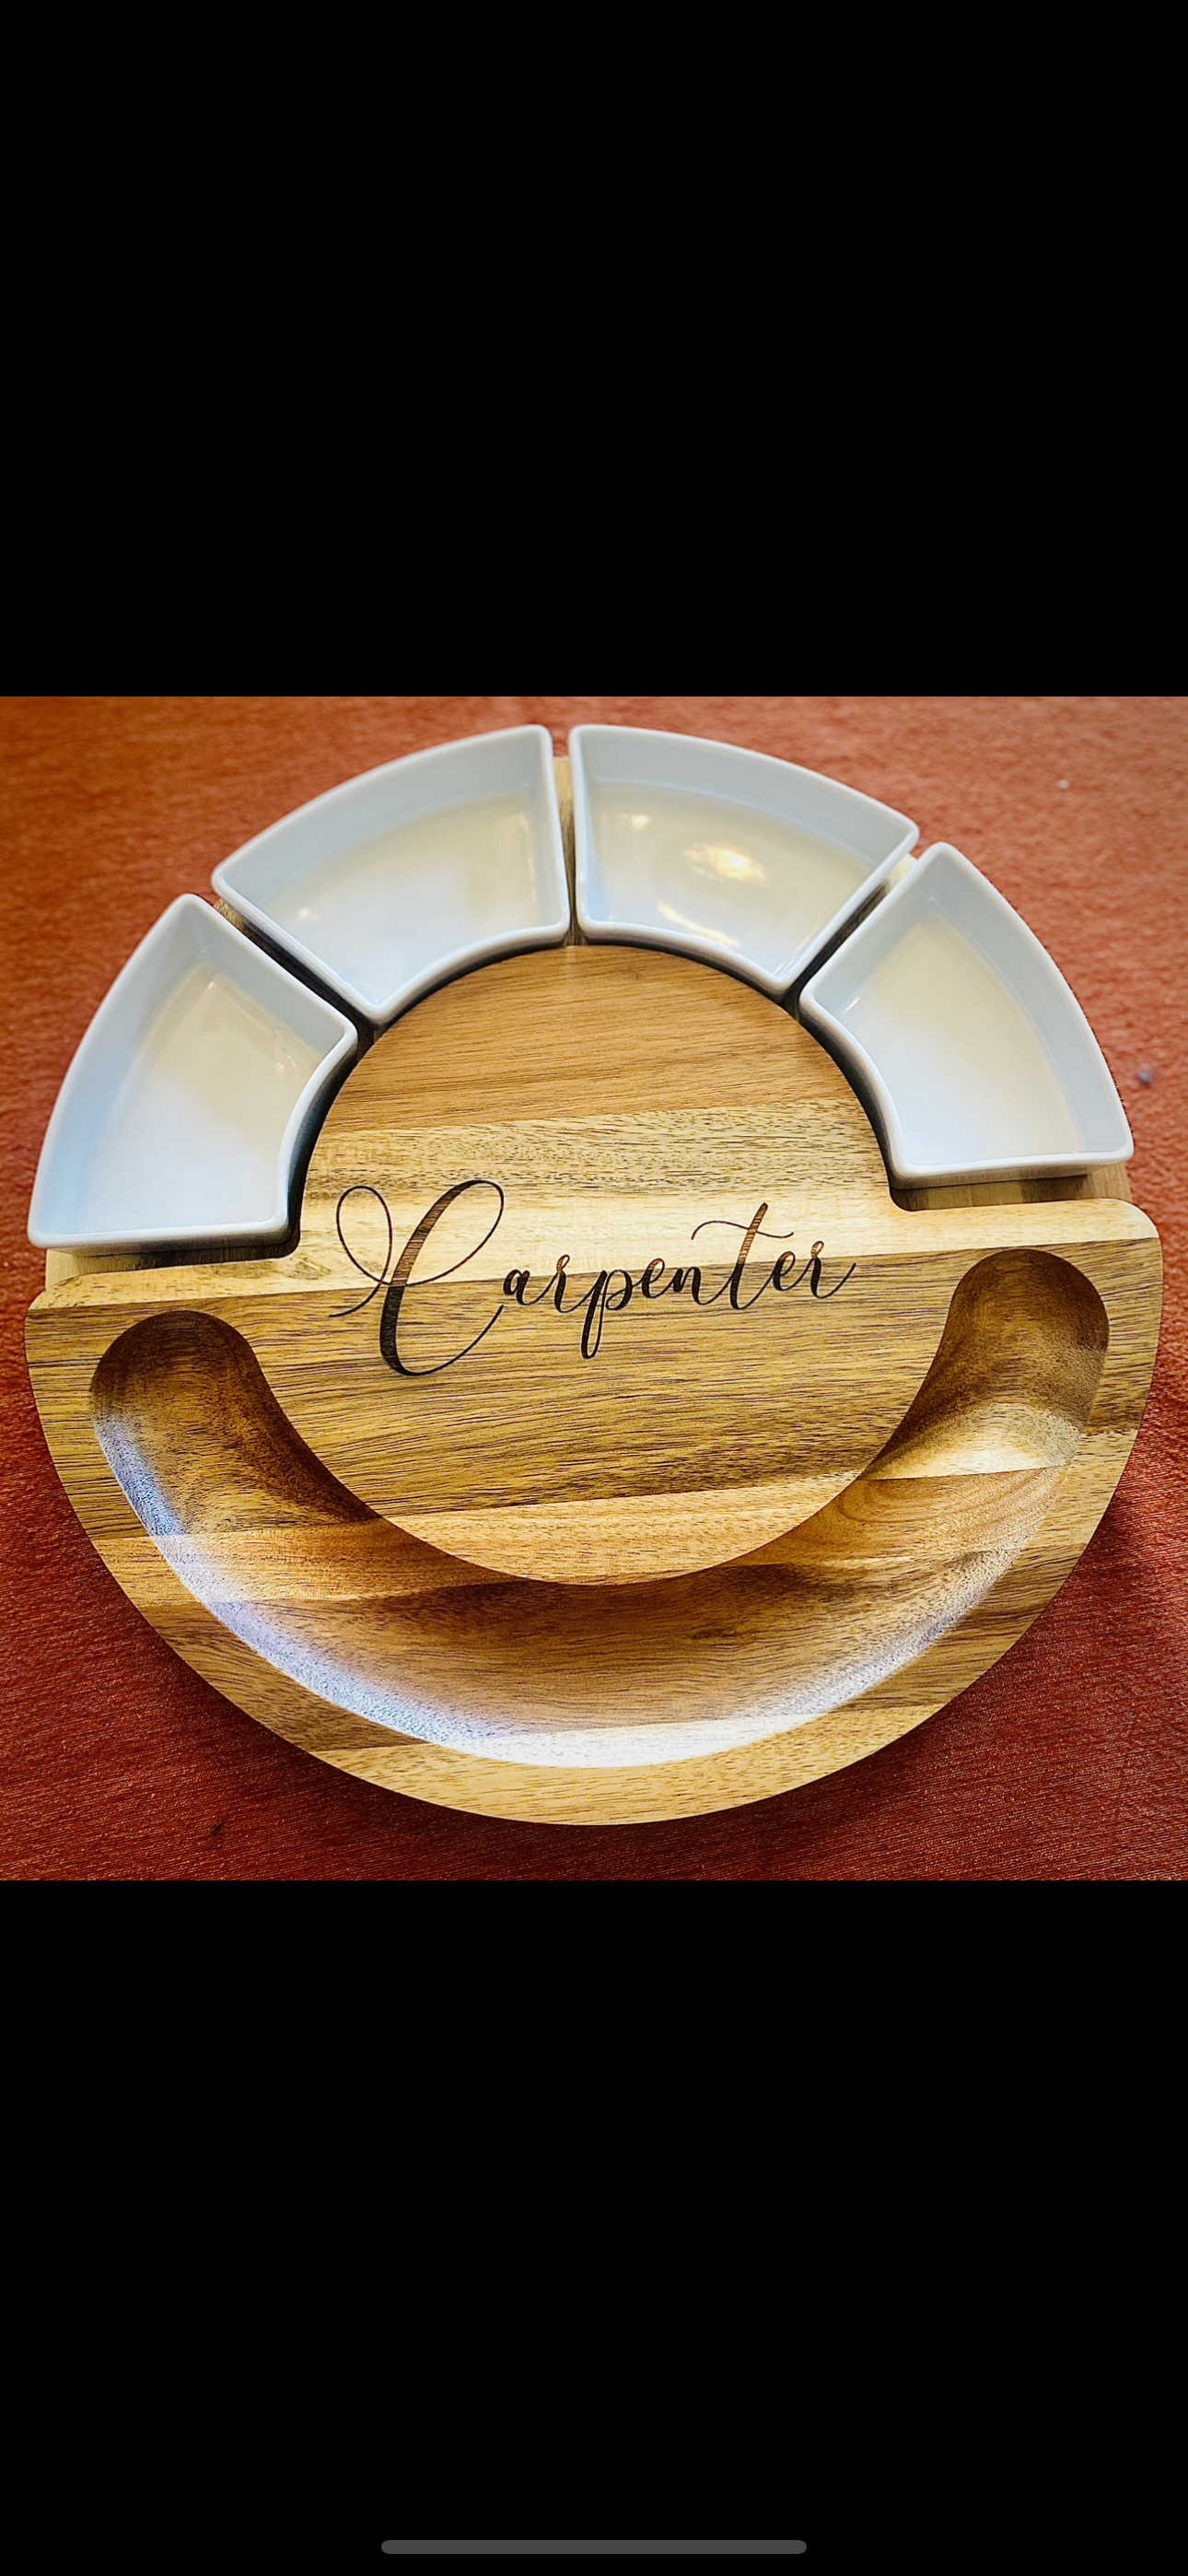 Personalized Wood Serving Platter